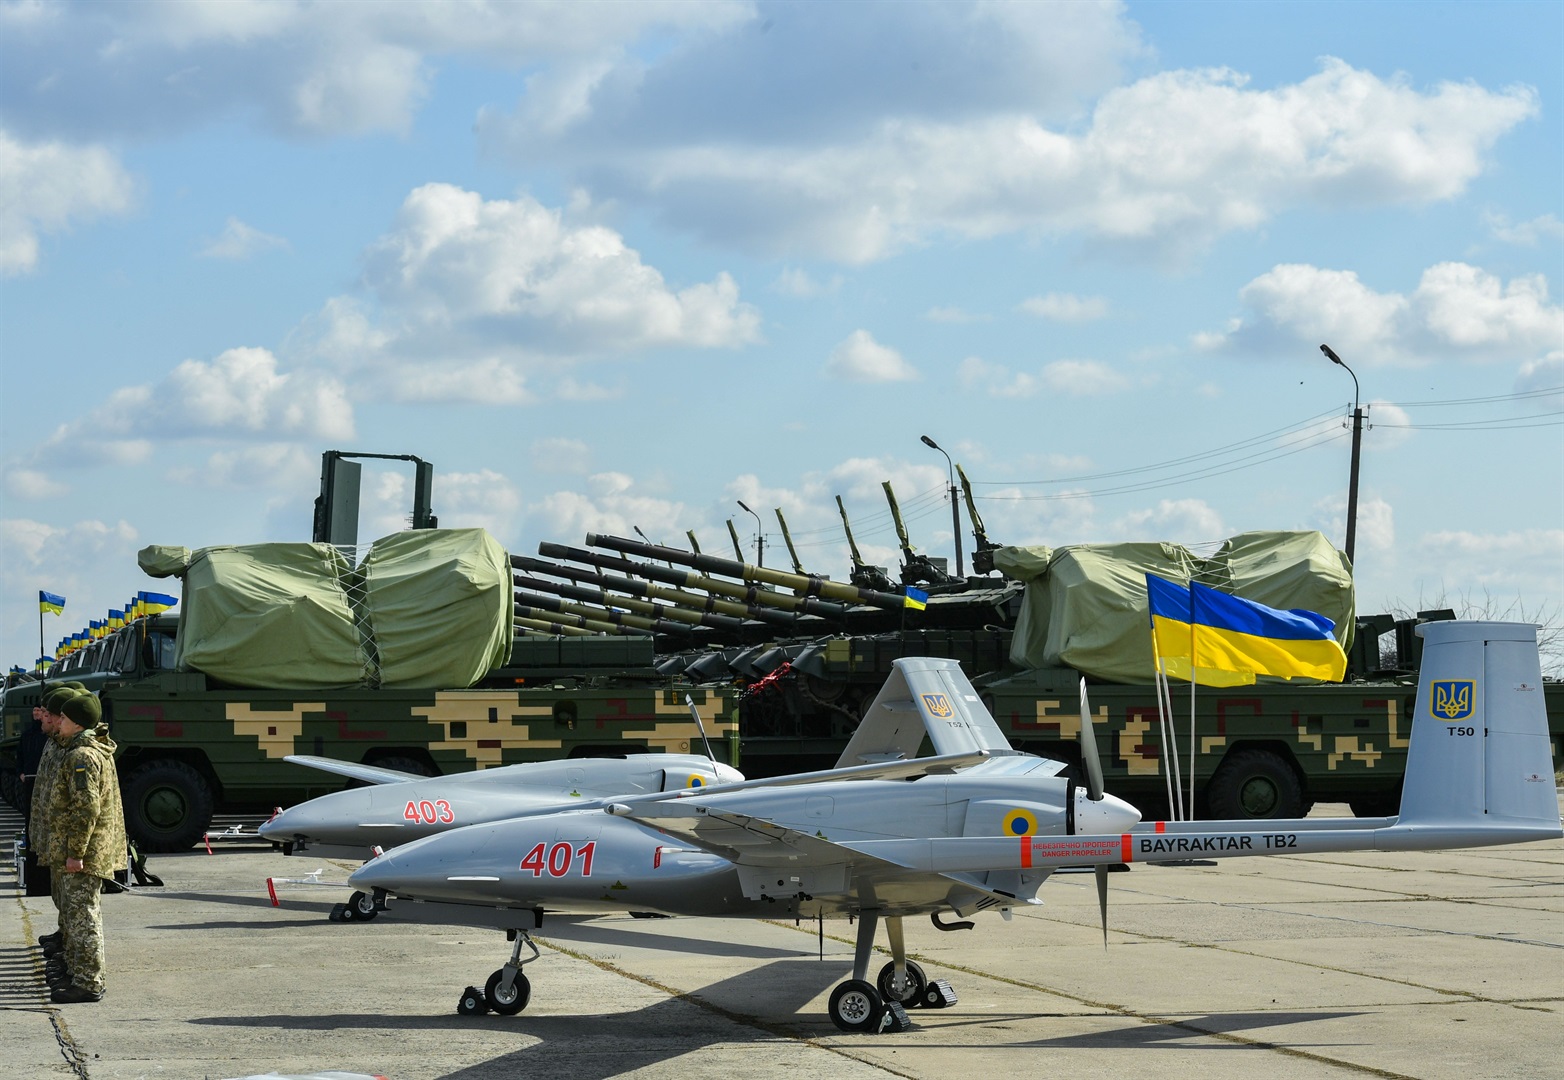 Ukraine’s drones are becoming increasingly ineffective as Russia ramps up its electronic warfare and air defenses